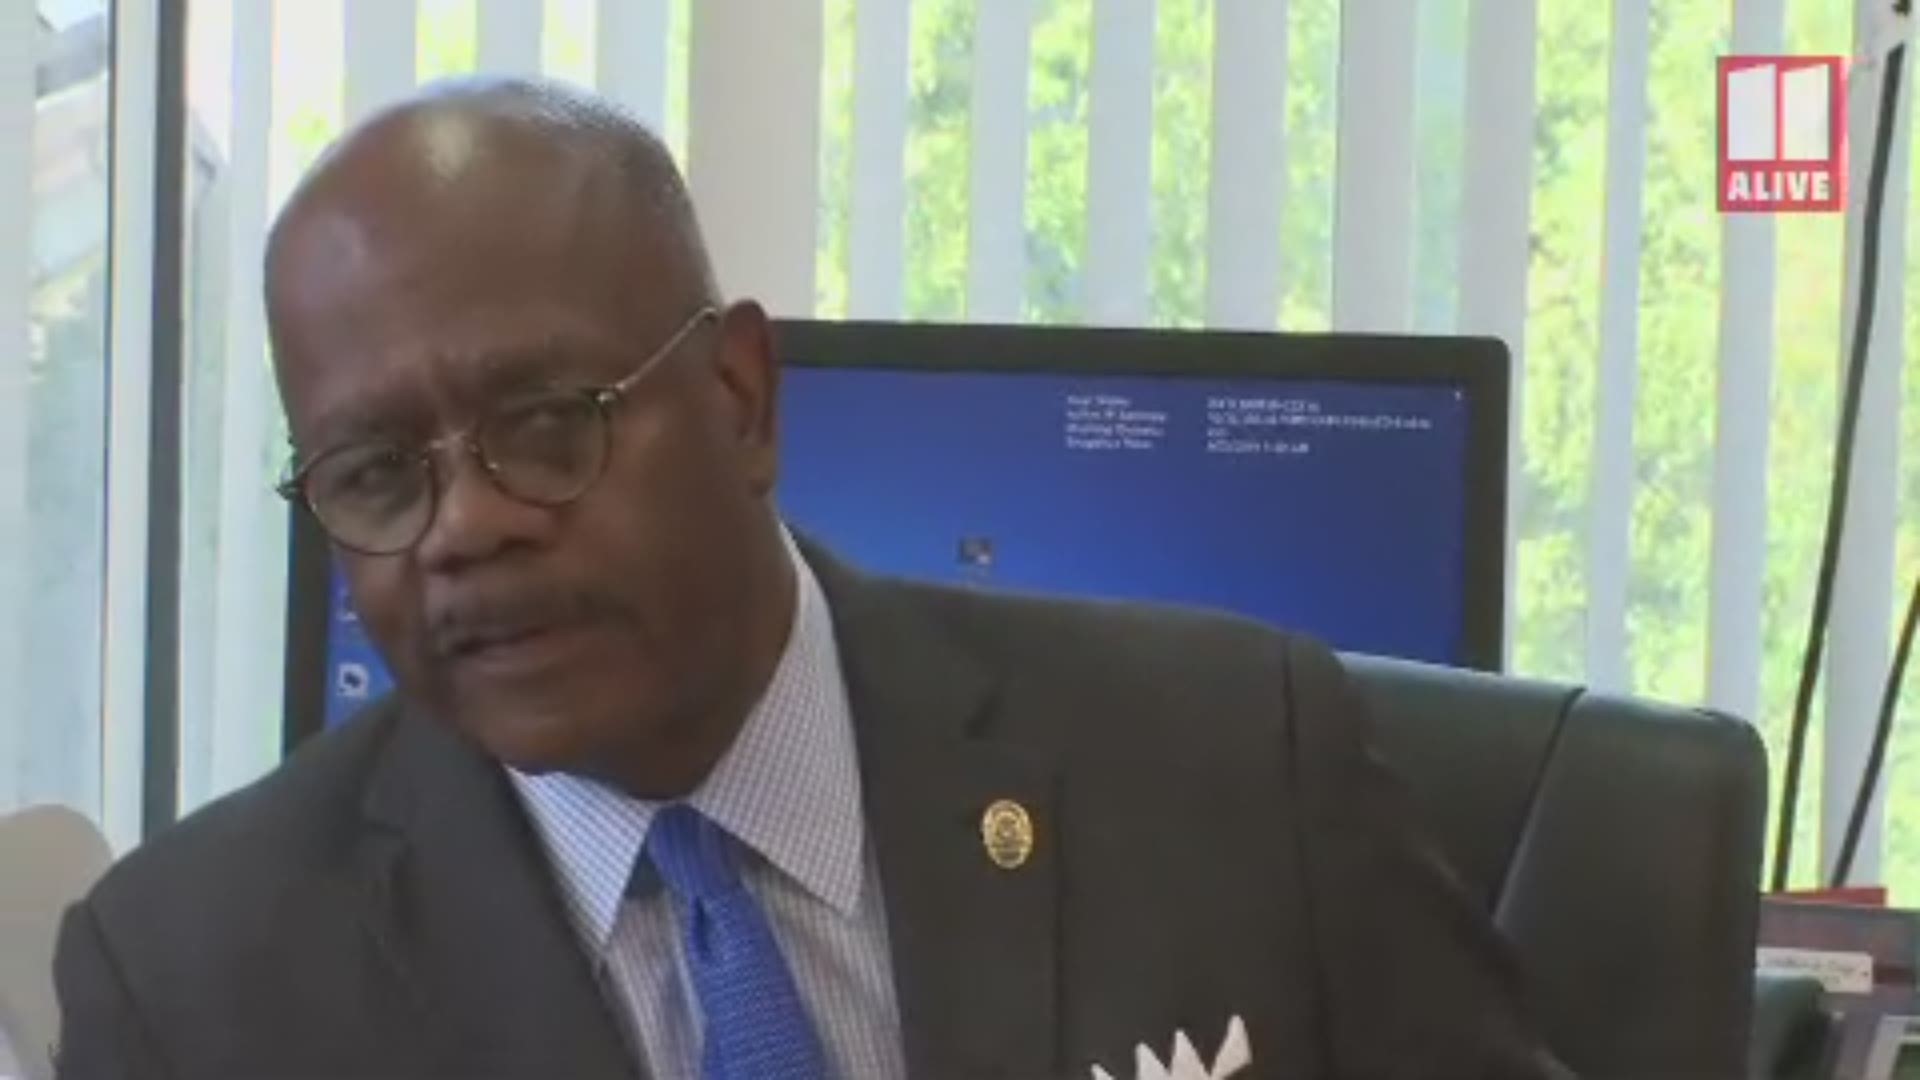 District Attorney Paul Howard Jr. has indicted a man for a rape committed against a Spelman College student 19 years ago. He's one of 156 suspects identified.